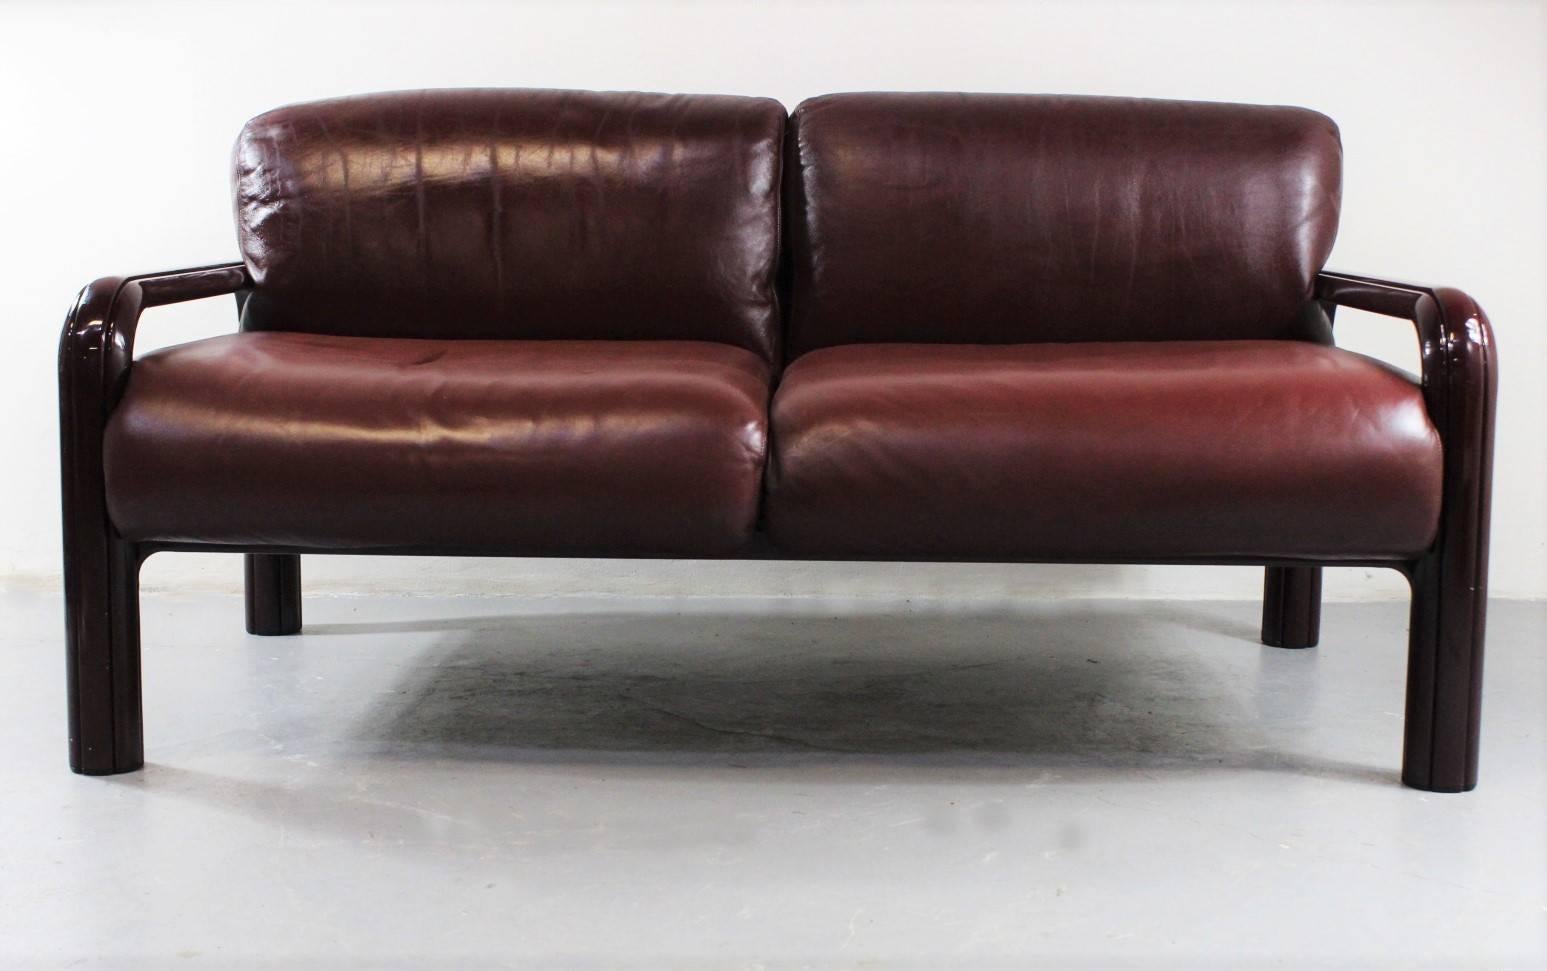 Two-seat leather sofa designed by Gae Aulenti for Knoll in the 1970s. The basic cylindrical construction is in extruded aluminium: Six amaranth triangular tubes radiating out from a common centre point. Originally upholstered with leather.

Two